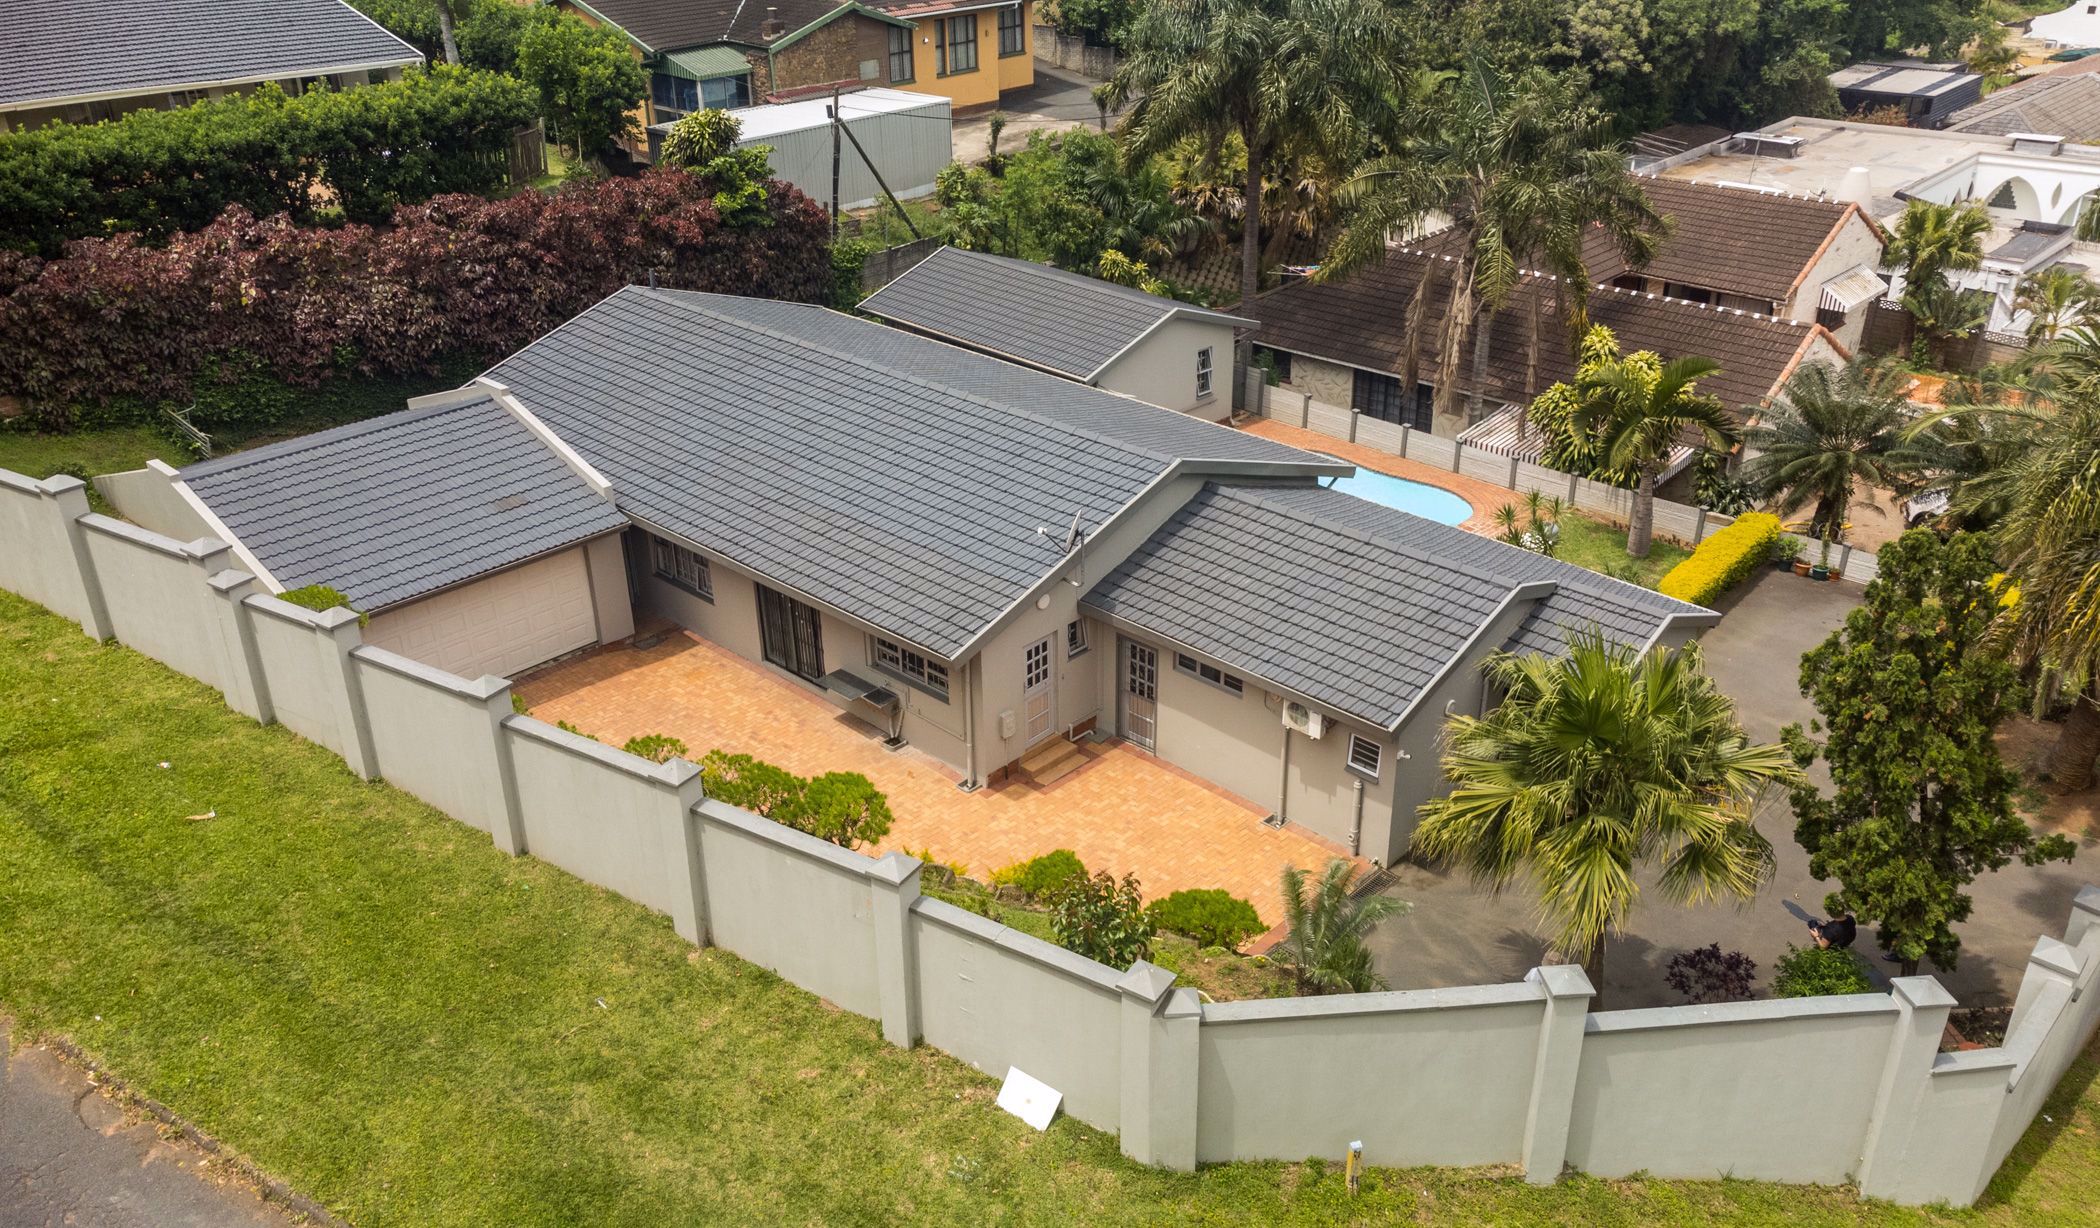 4 bedroom house to rent in Riverside (Durban North)